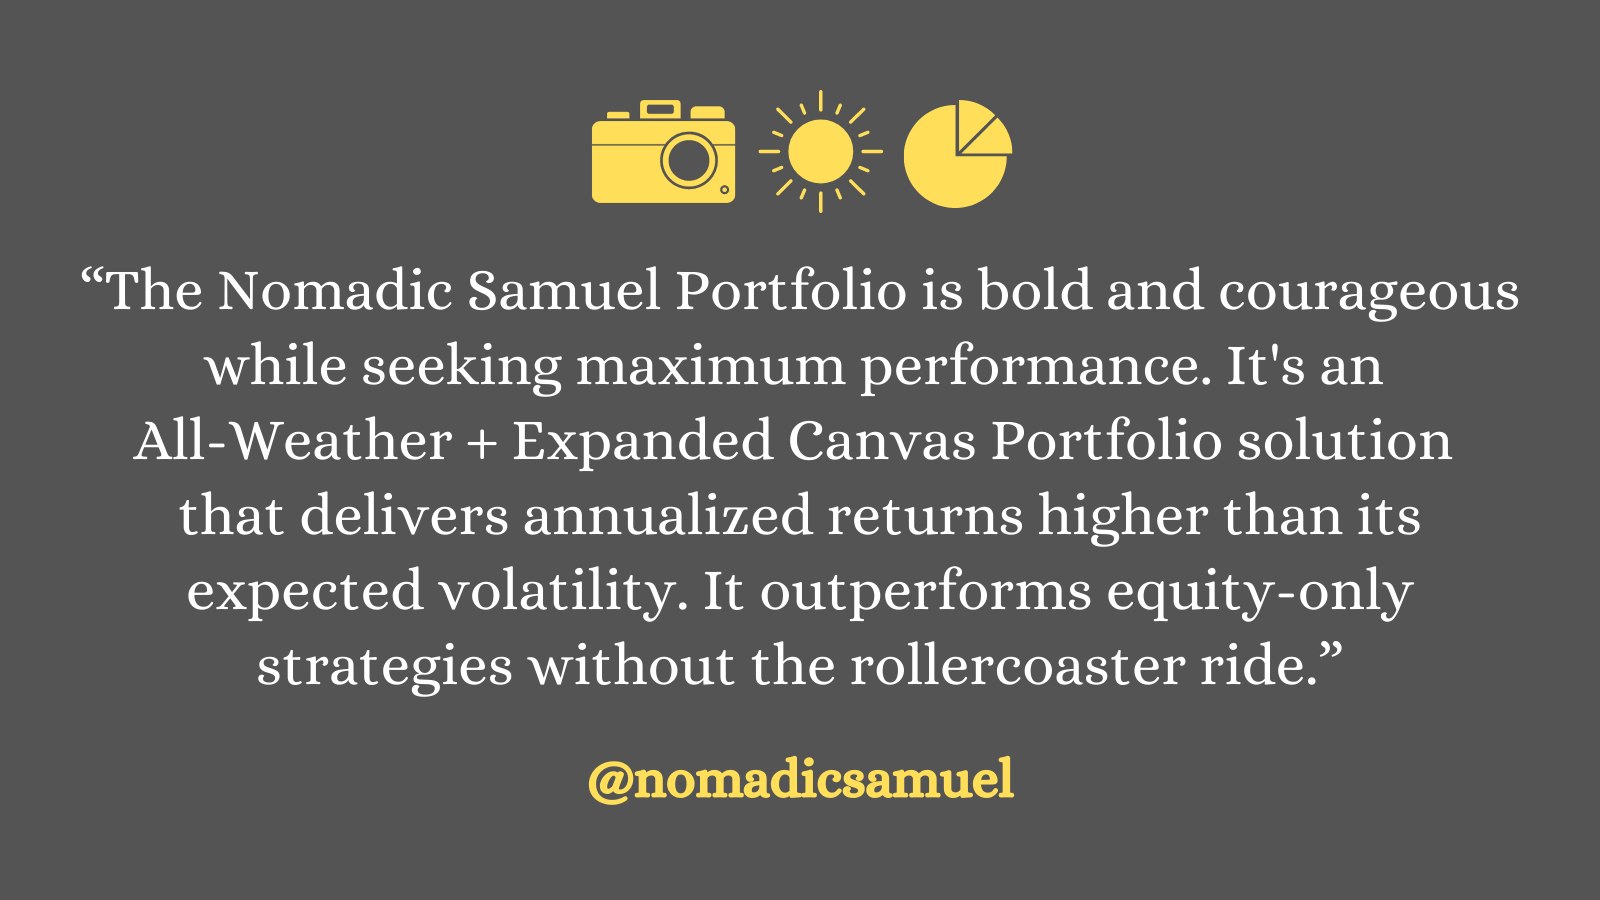 The Nomadic Samuel Portfolio is bold and courageous while seeking maximum performance. Its an all-weather + expanded canvas portfolio solution that delivers annualized returns higher than its expected volatility. It outperforms equity-only strategies without the rollercoaster ride.